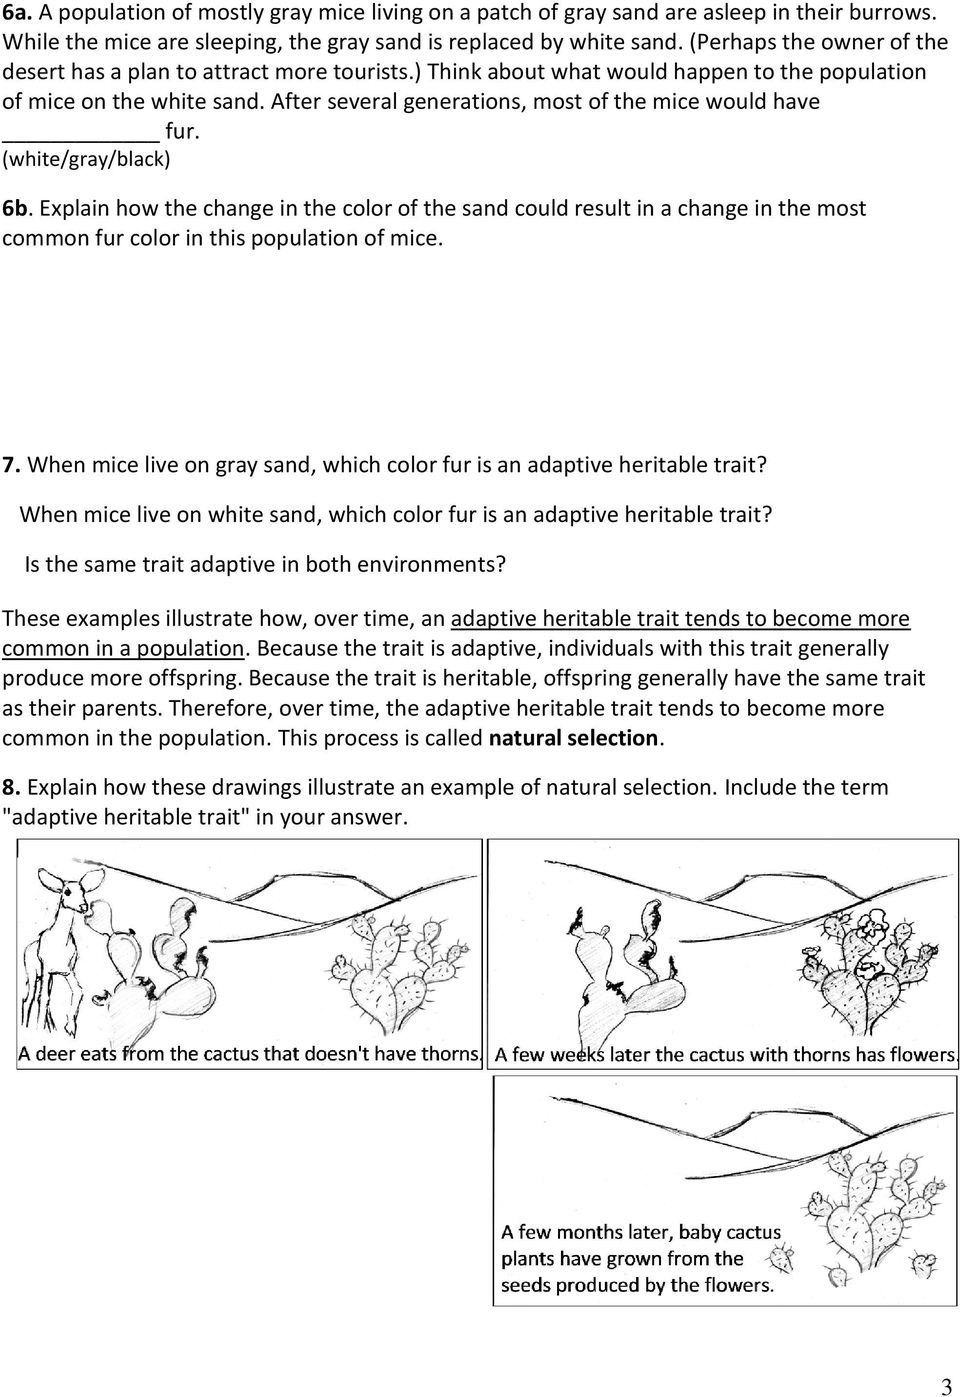 Evolution by Natural Selection 11 - PDF Free Download In Evolution And Natural Selection Worksheet